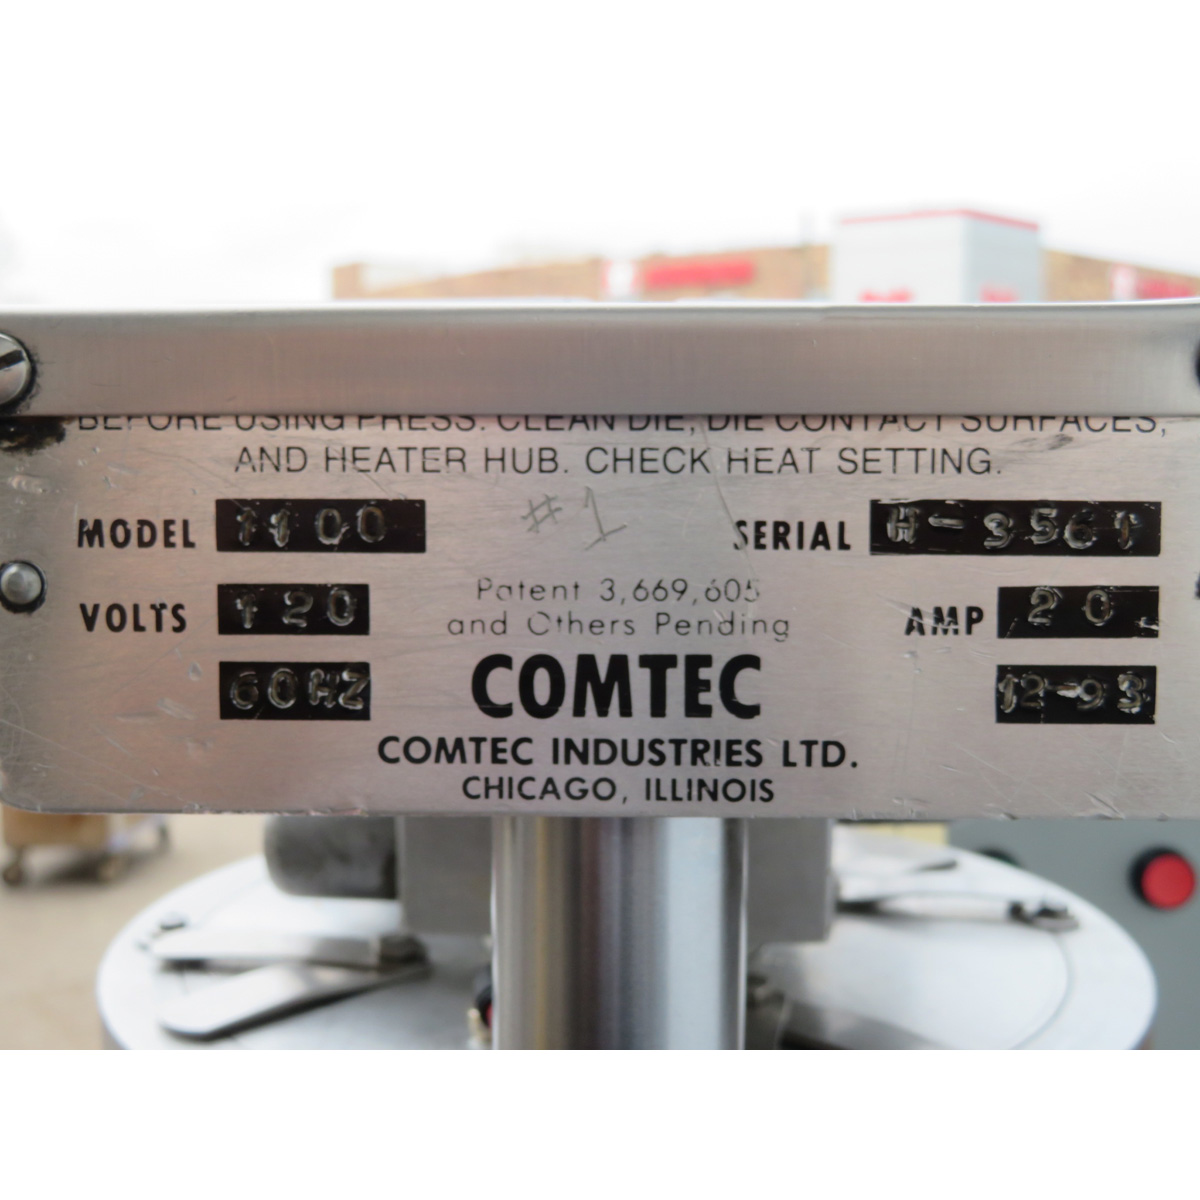 Comtec Pie Crust Forming Press 1100, Used Excellent Condition image 6